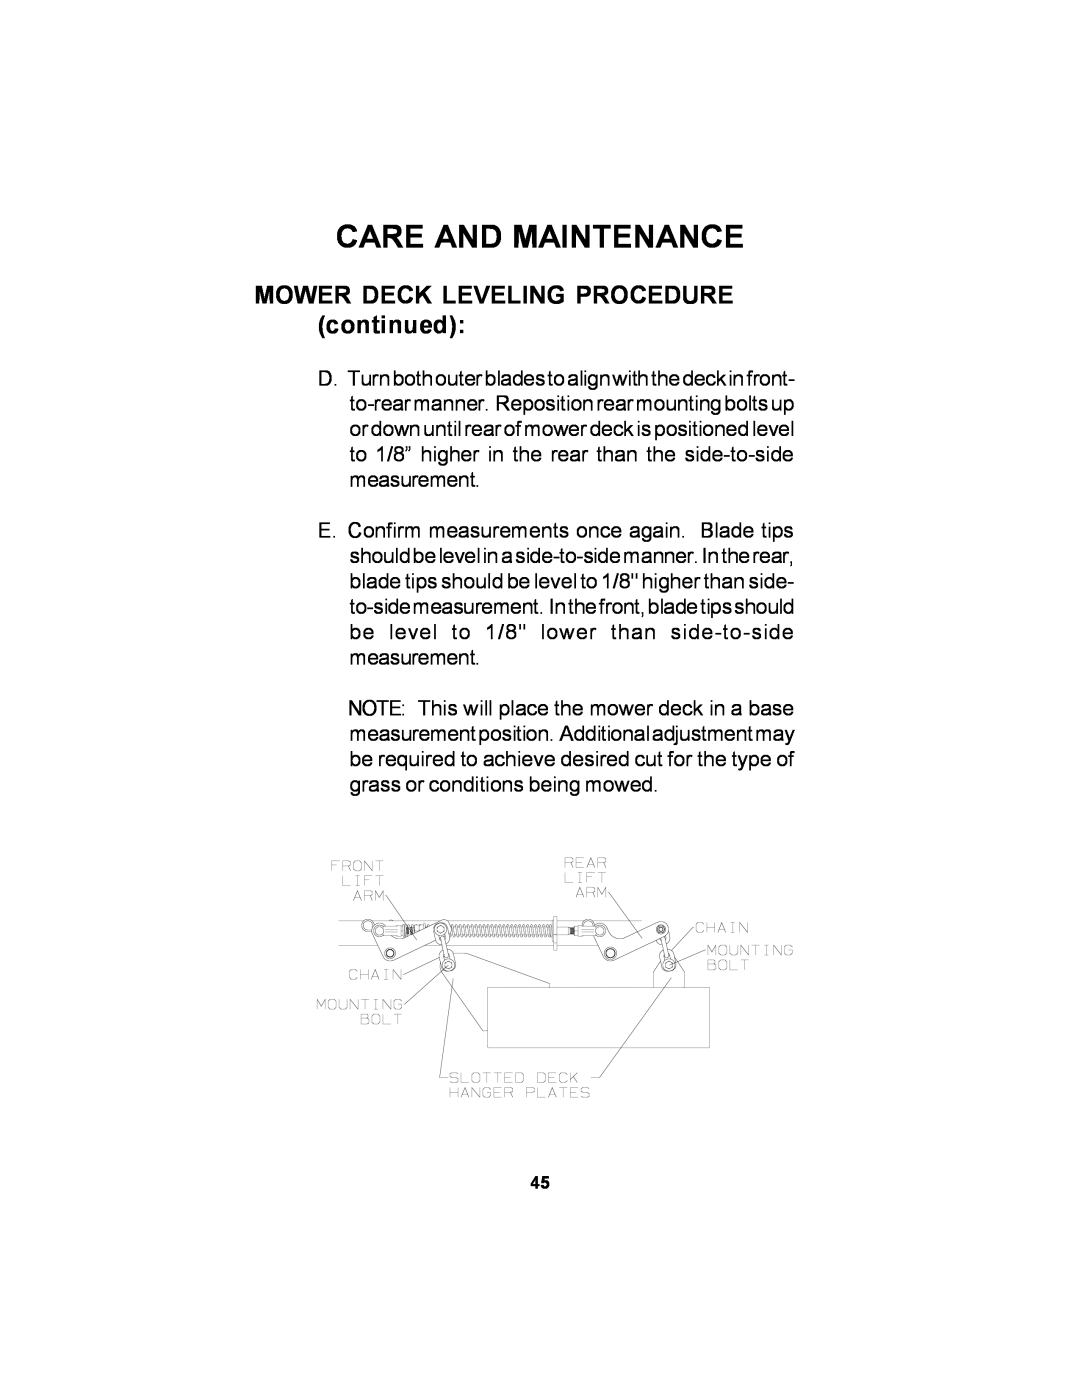 Dixon 11249-106 manual MOWER DECK LEVELING PROCEDURE continued, Care And Maintenance 